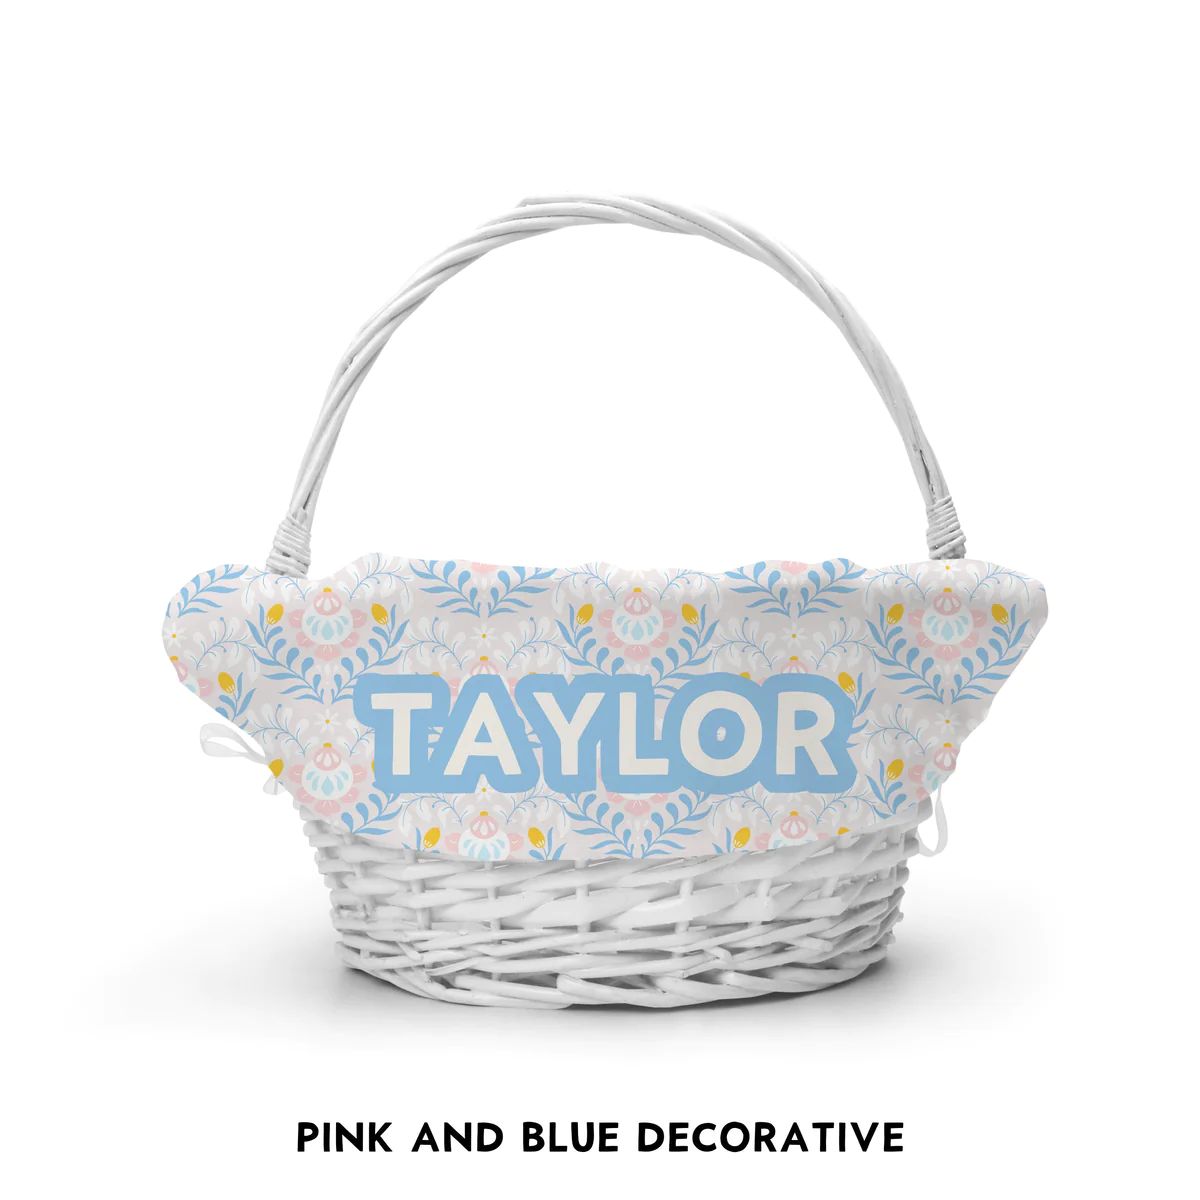 Personalized Easter Basket Liner - Pink and Blue Decorative | The Little Lemons Company